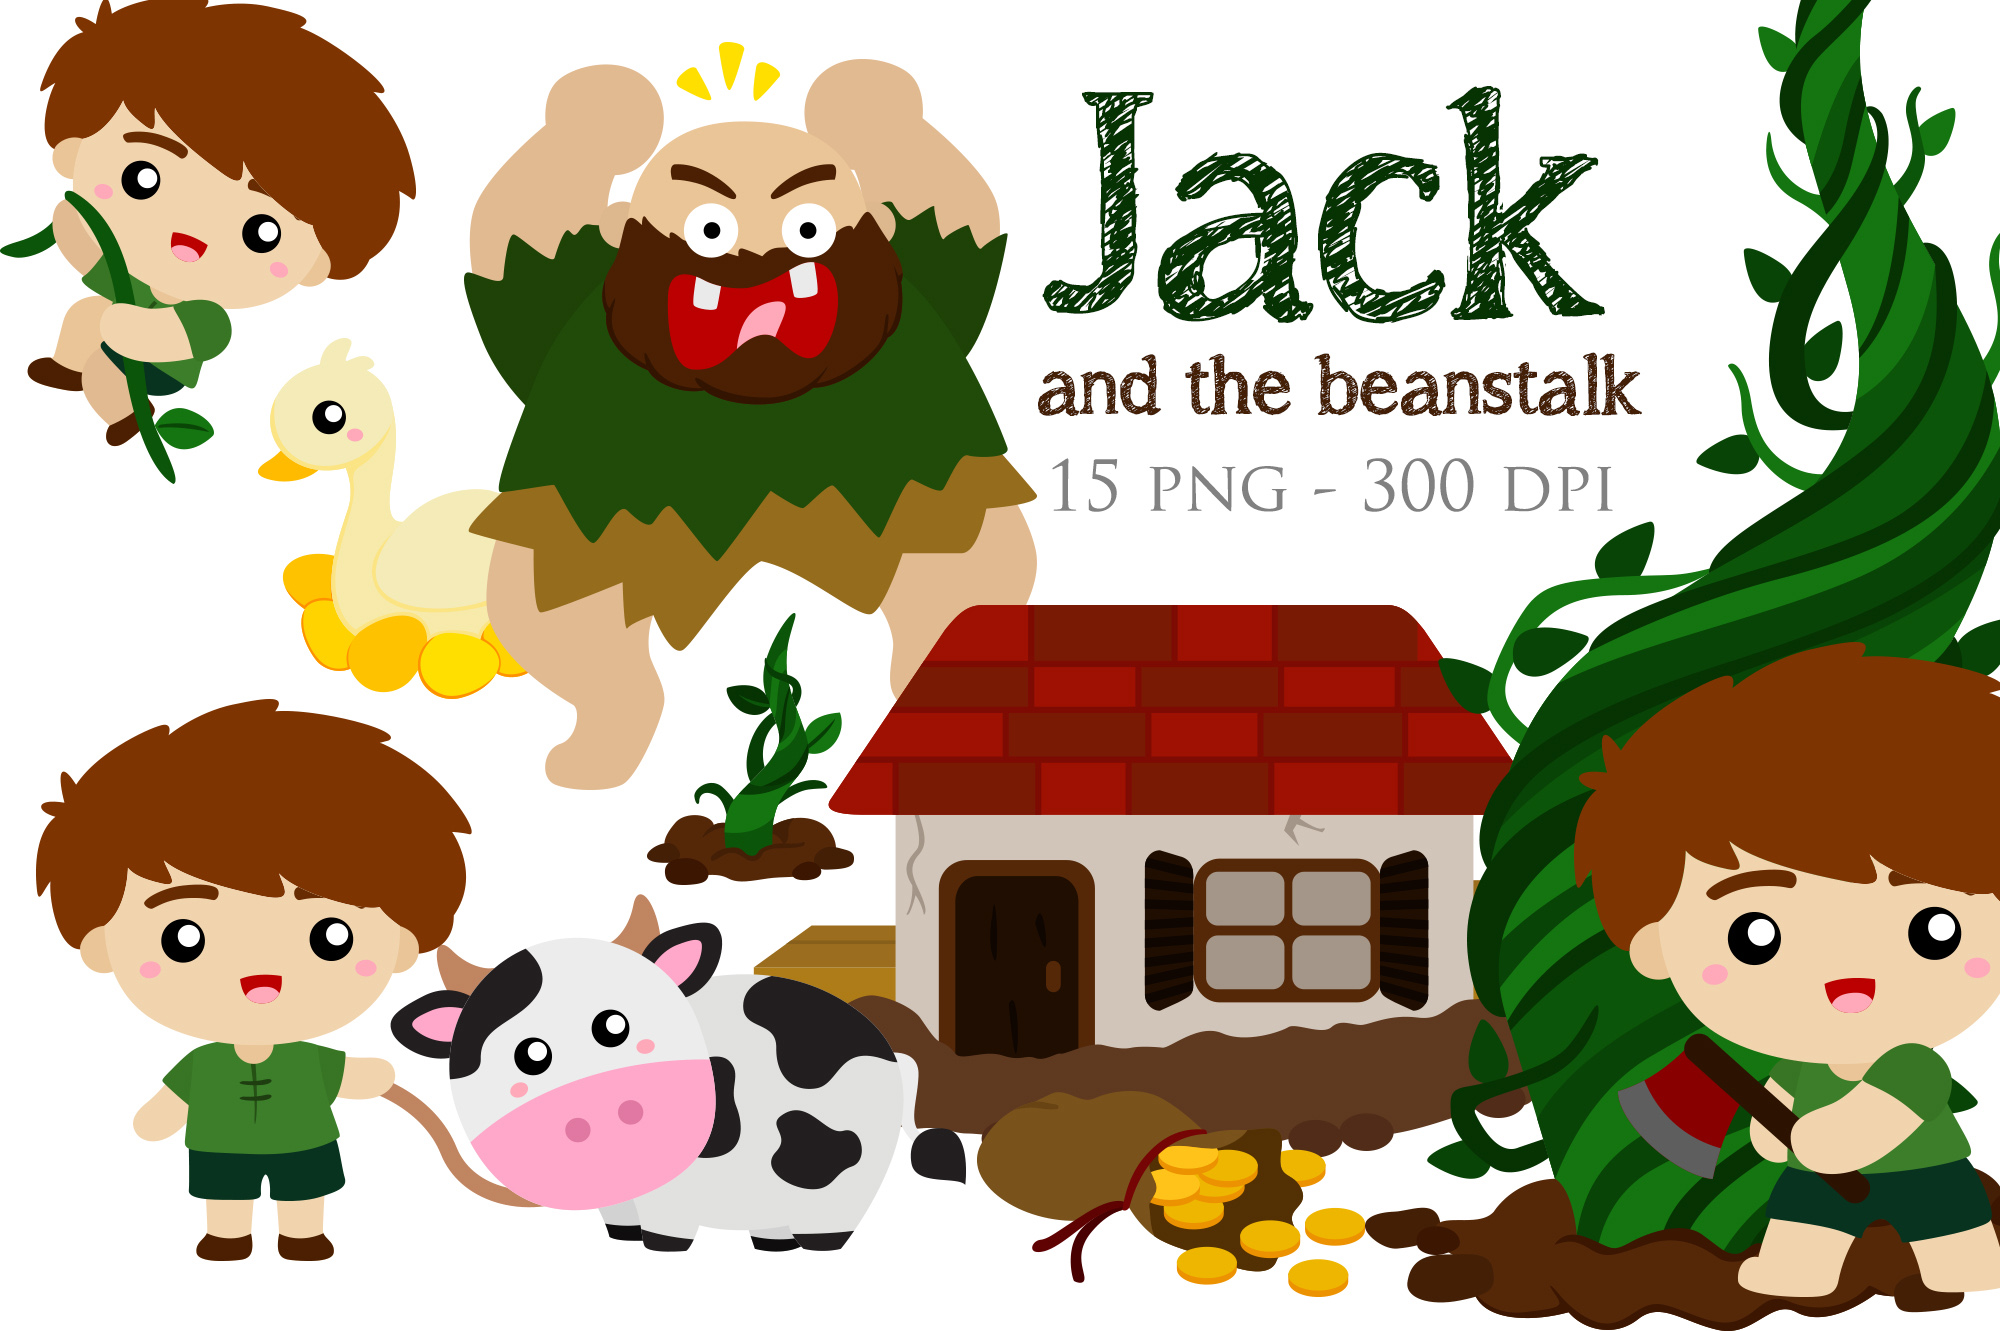 jack from jack and the beanstalk clipart